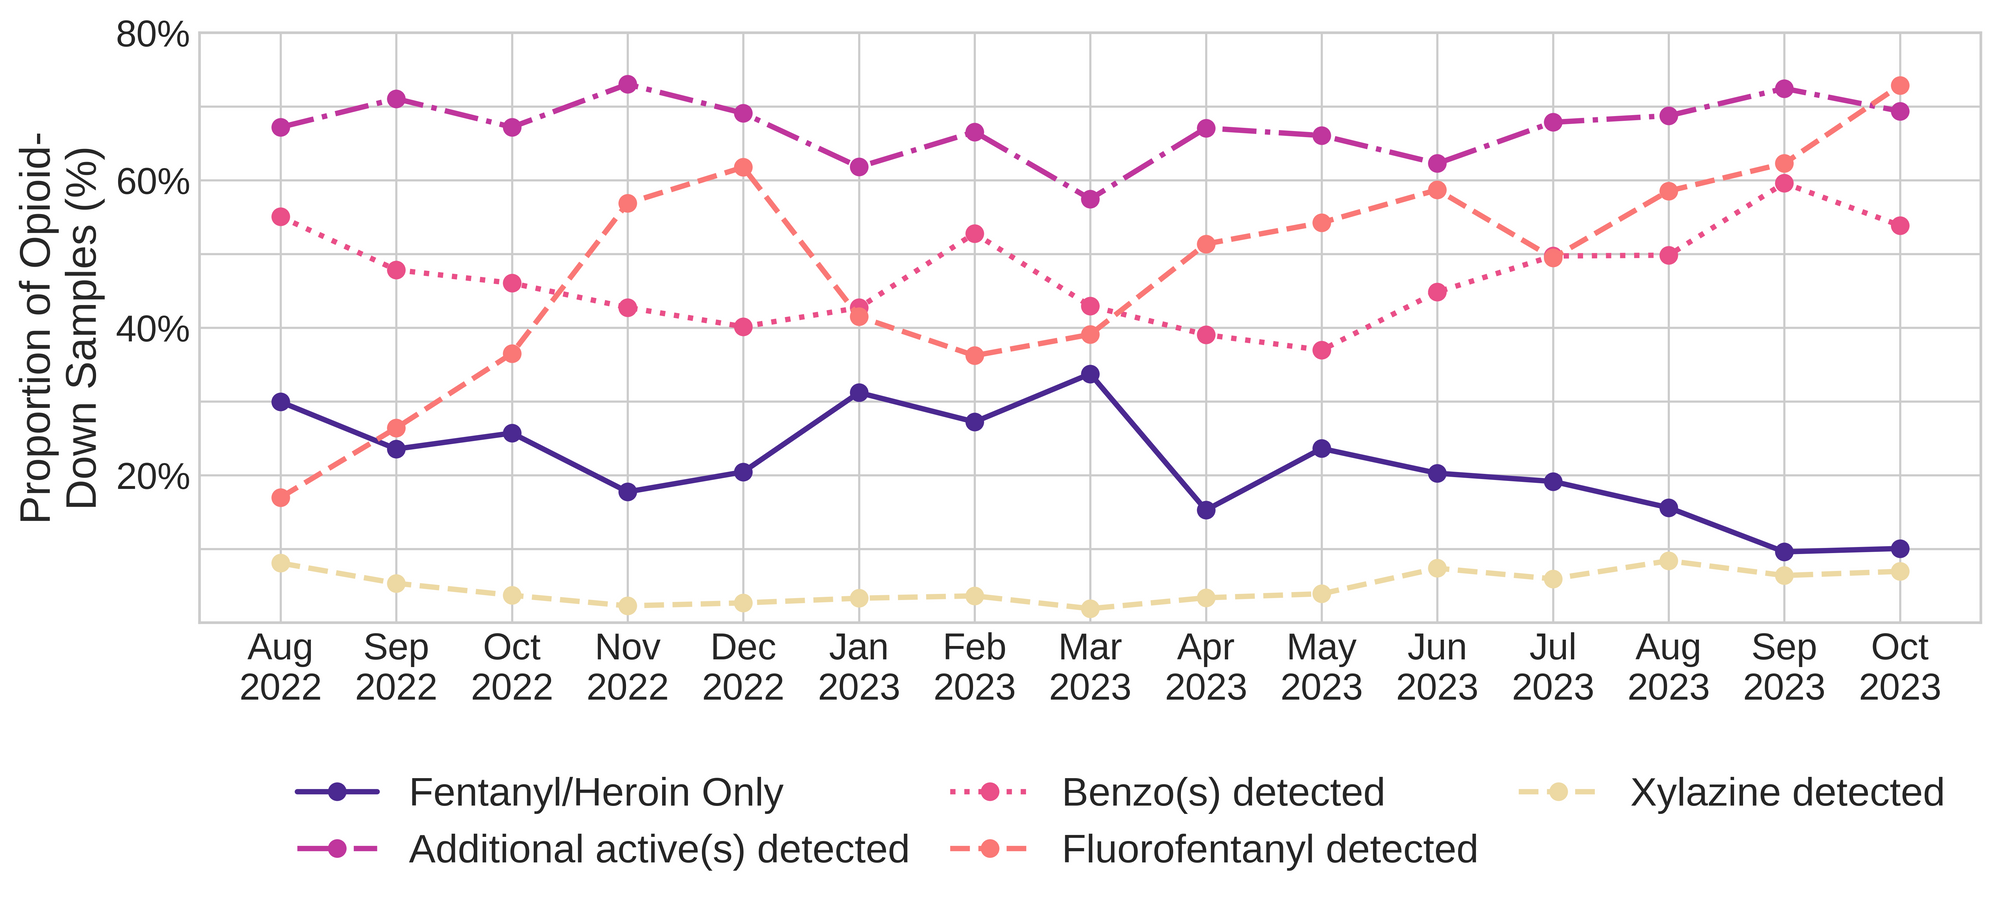 Figure 3. The percentage of expected opioid-down samples checked between August 2022 and October 2023 that only contained fentanyl/heroin actives (solid dark blue), opioid-down samples with an additional active detected (dot-dashed purple), opioid-down samples that contained a benzodiazepine-related drug (dotted magenta), opioid-down samples that contained fluorofentanyl (dashed salmon), and opioid-down samples that contained xylazine (dashed yellow).